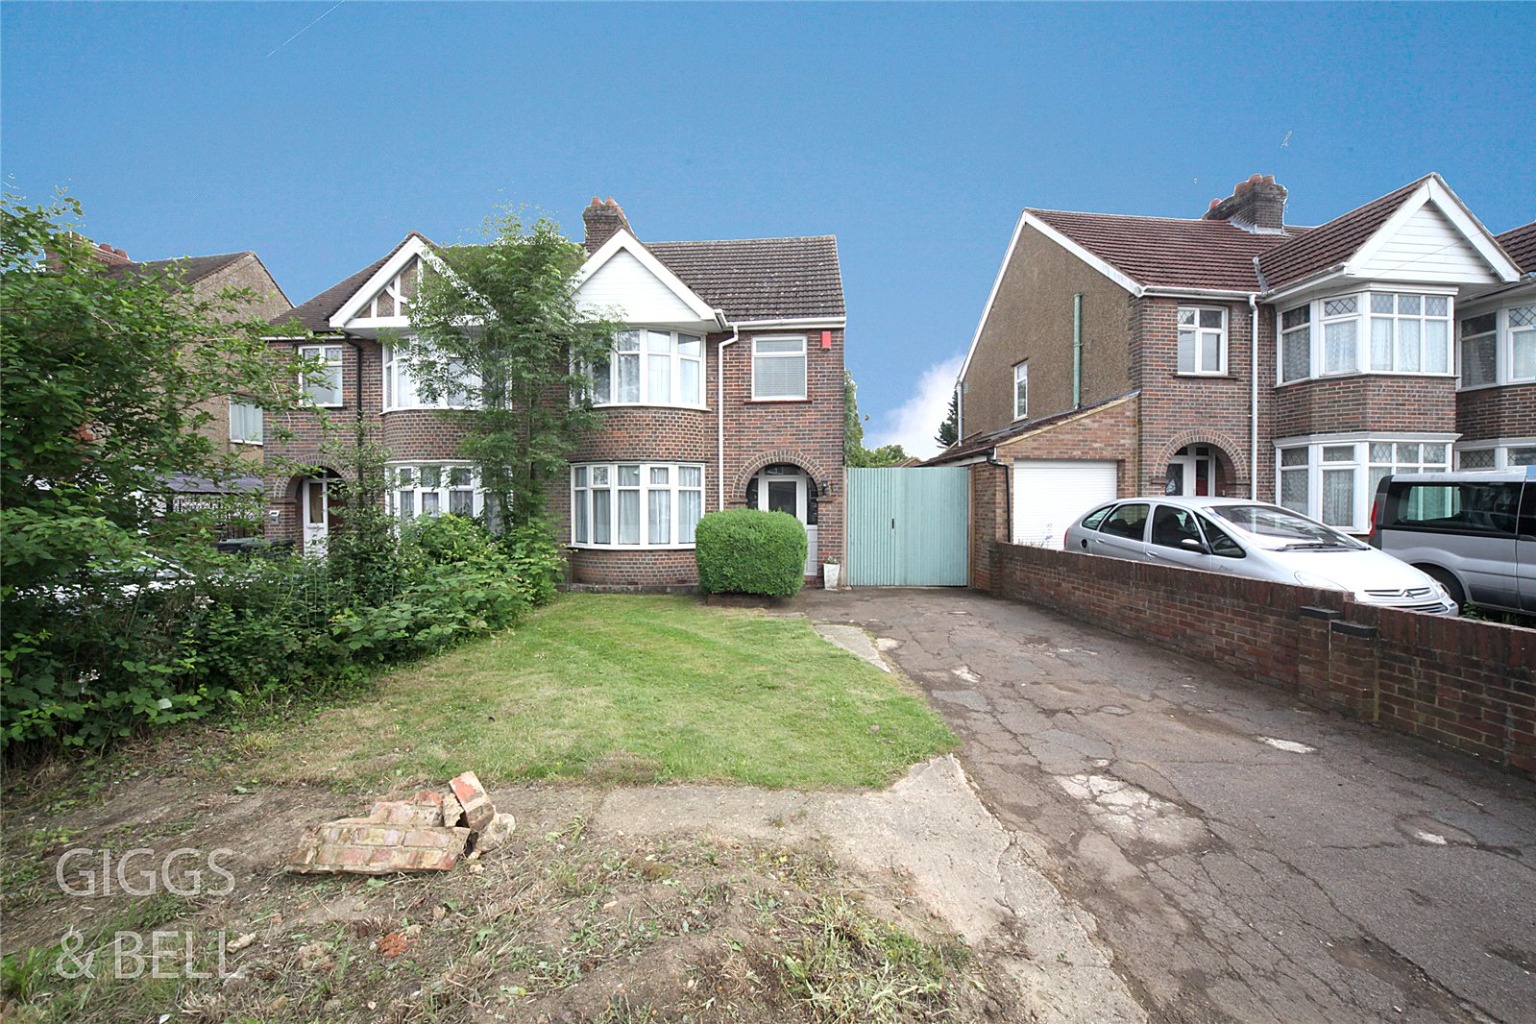 3 bed semi-detached house for sale in Ashcroft Road, Luton - Property Image 1